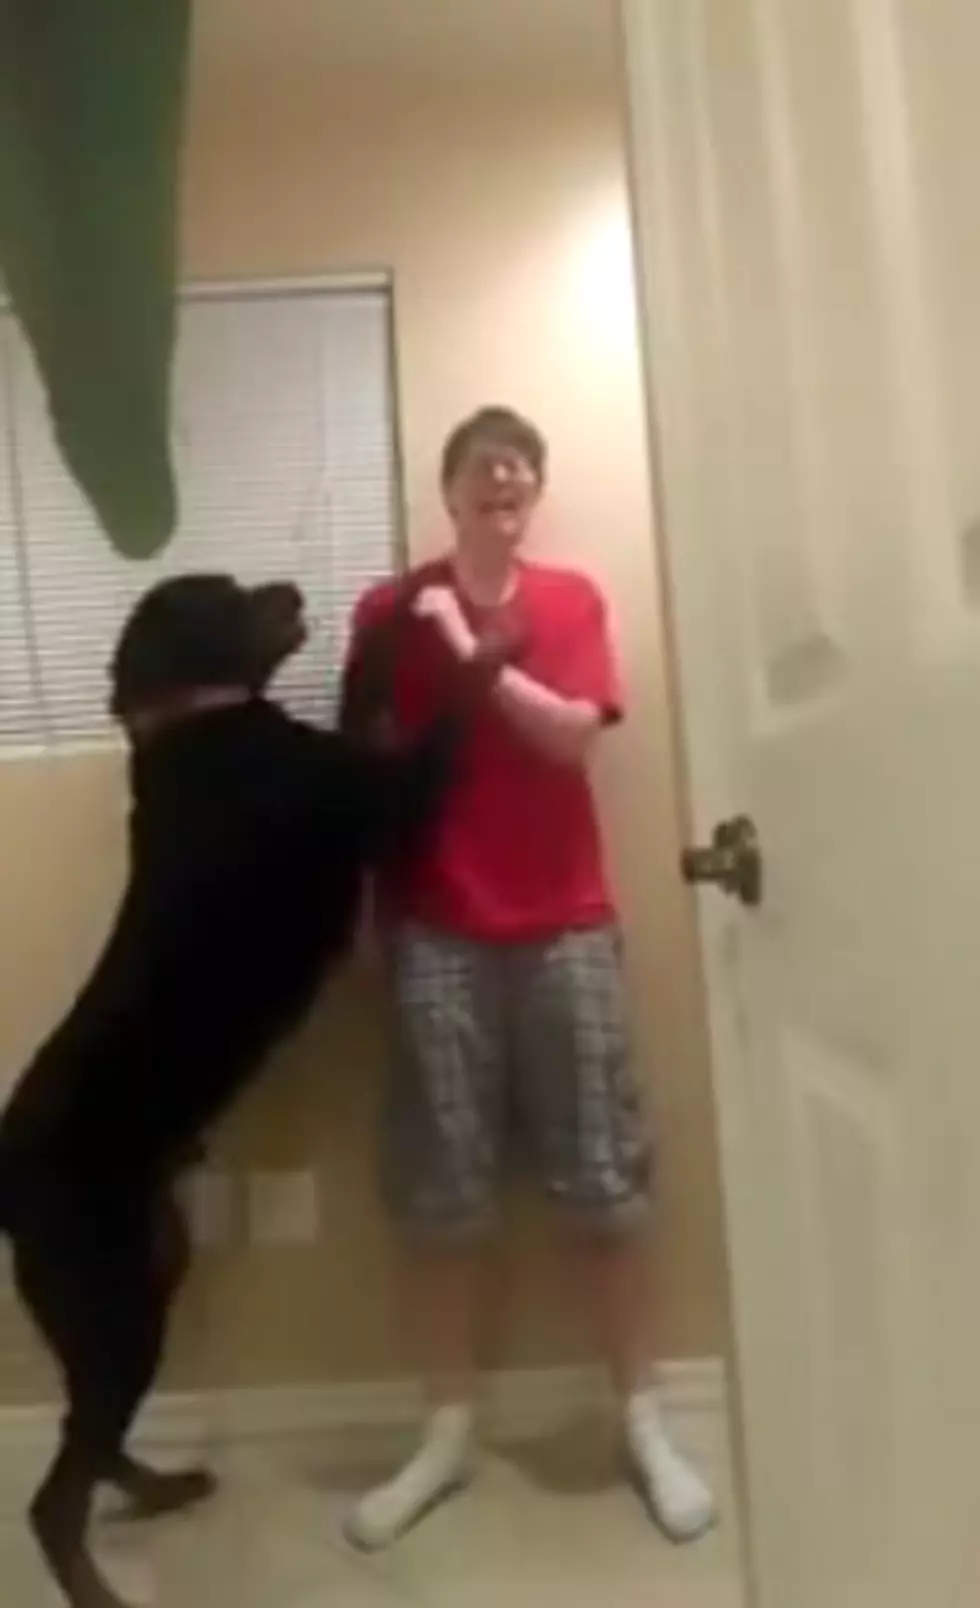 Amazing Service Dog Helps Calm Owner Suffering An Asperger&#8217;s-Induced Meltdown [VIDEO]